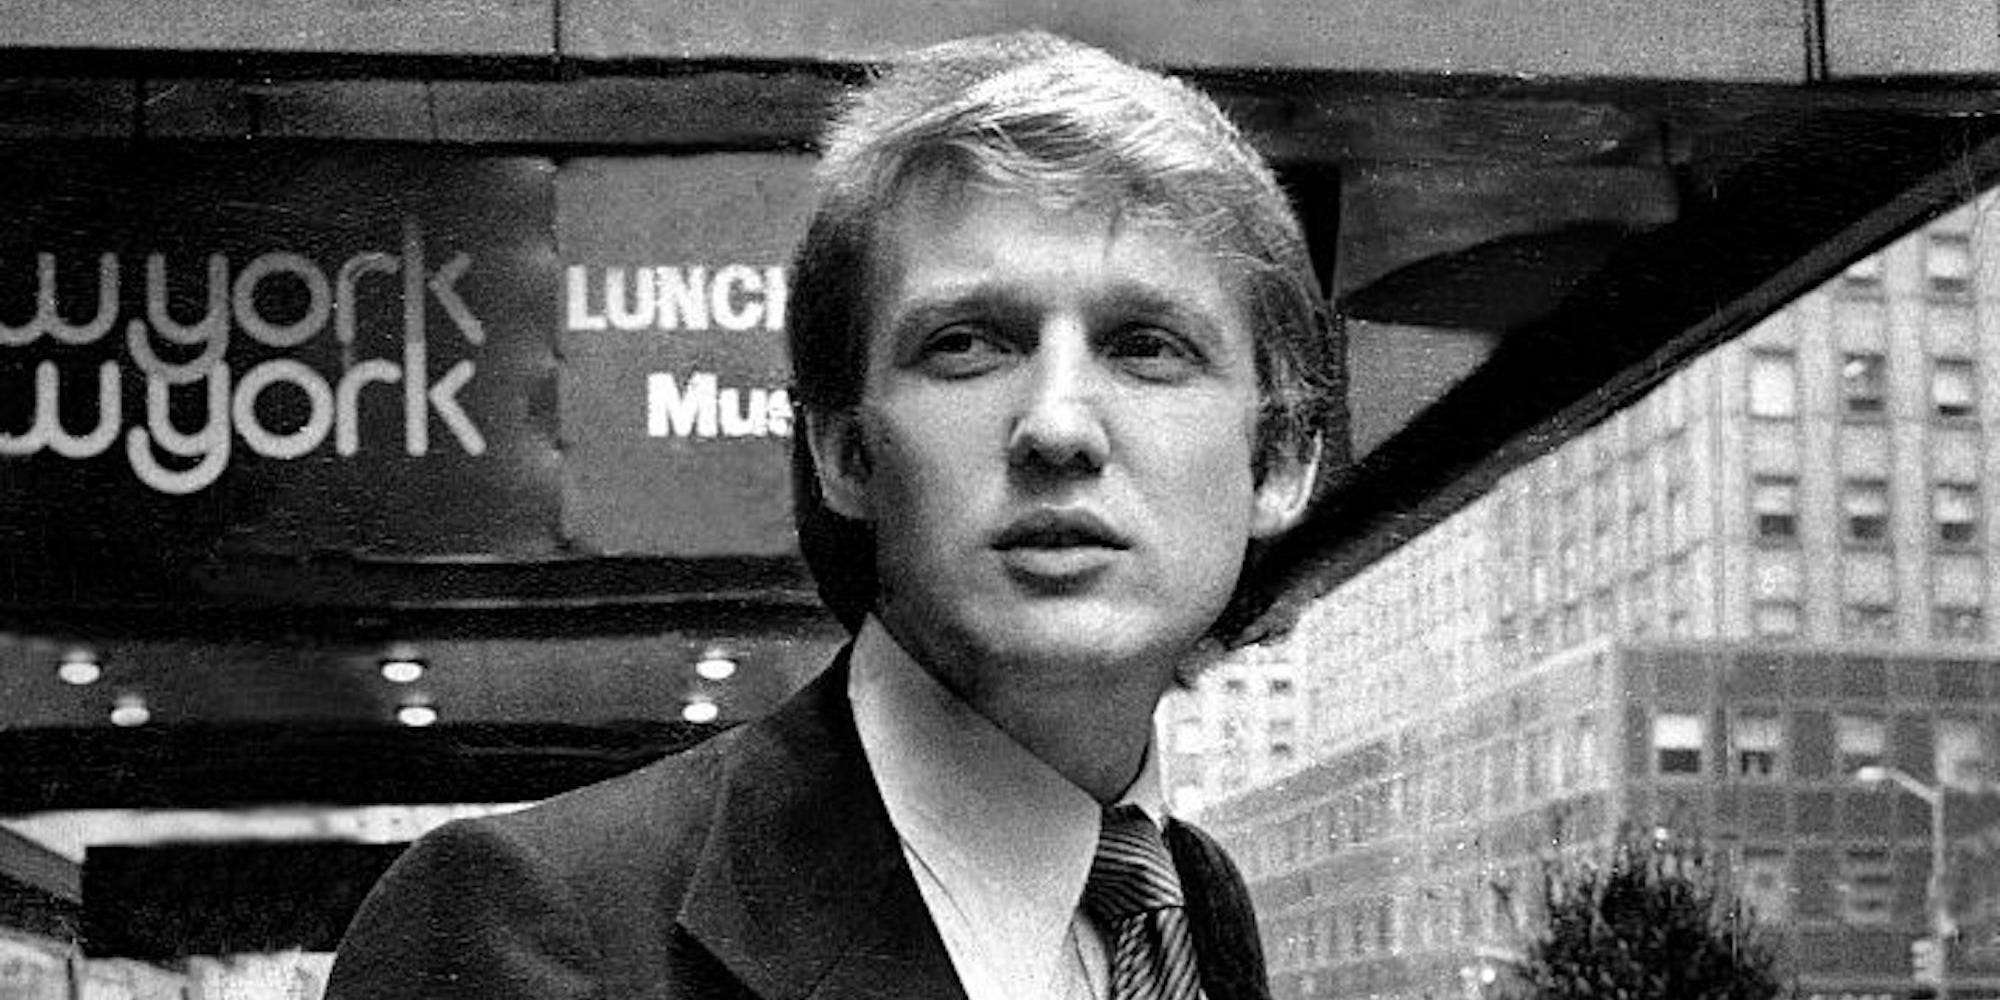 Trump May Have Scored A Decades Old Revenge For Being Sued Under A 1973